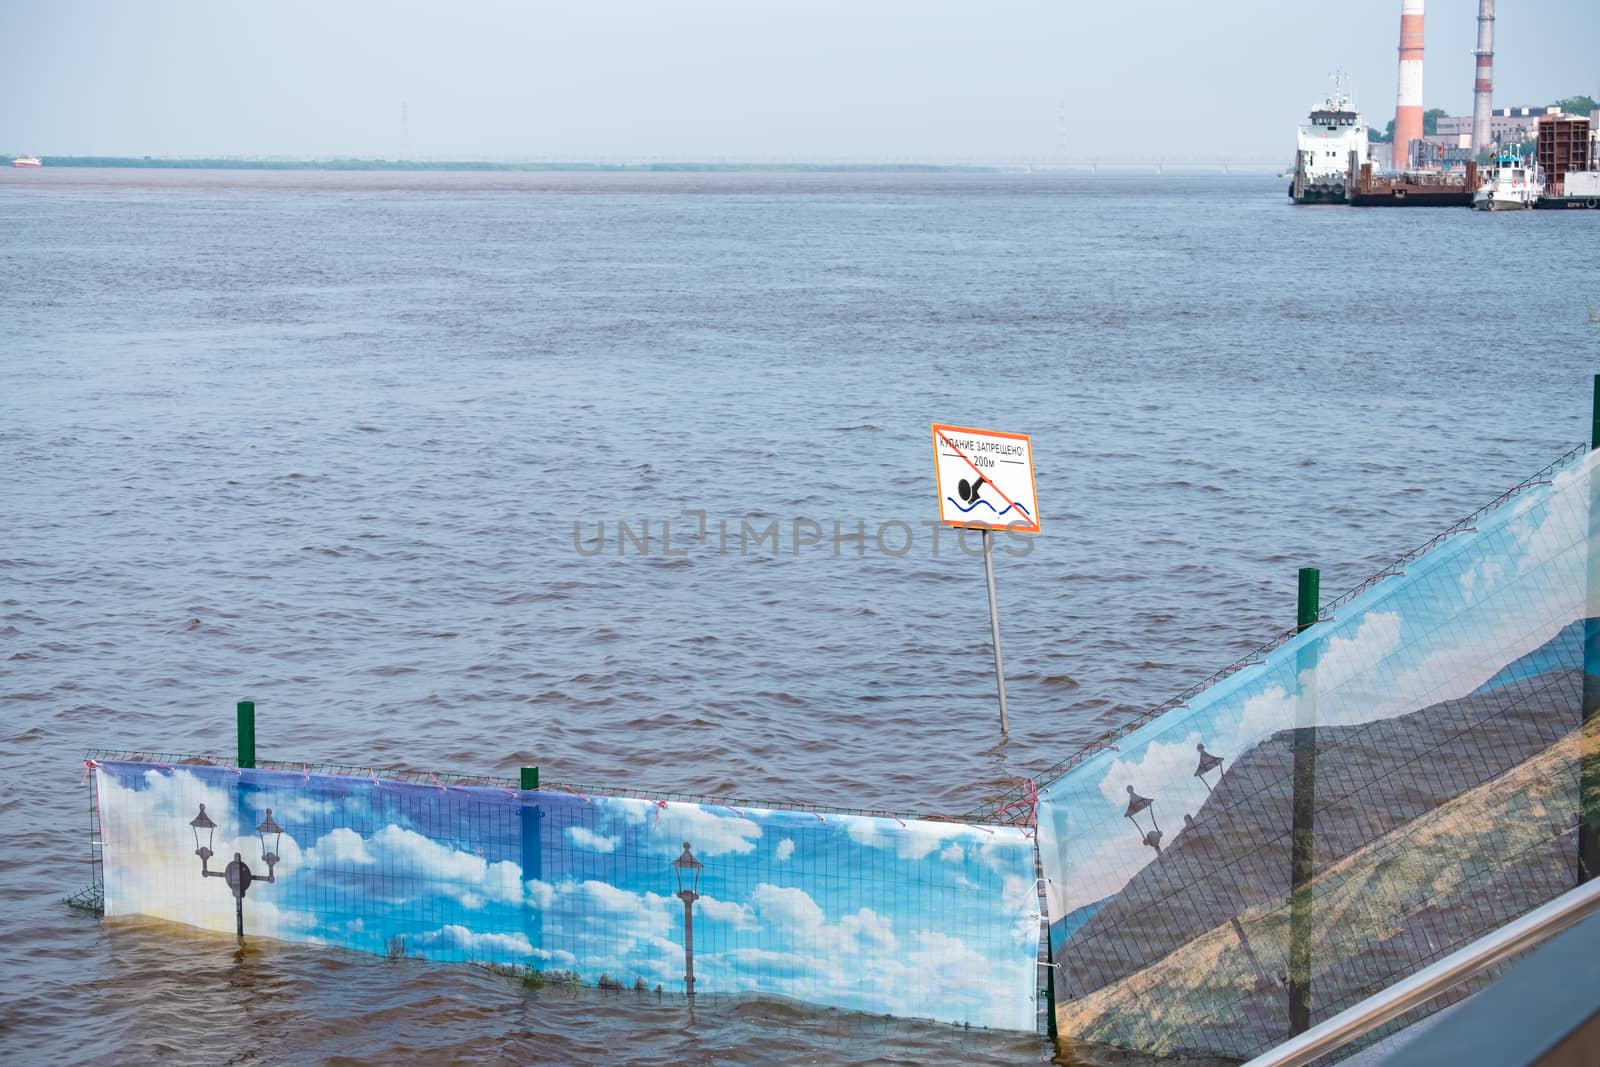 Khabarovsk, Russia - Aug 08, 2019: Flood on the Amur river near the city of Khabarovsk. The level of the Amur river at around 159 centimeters. by rdv27